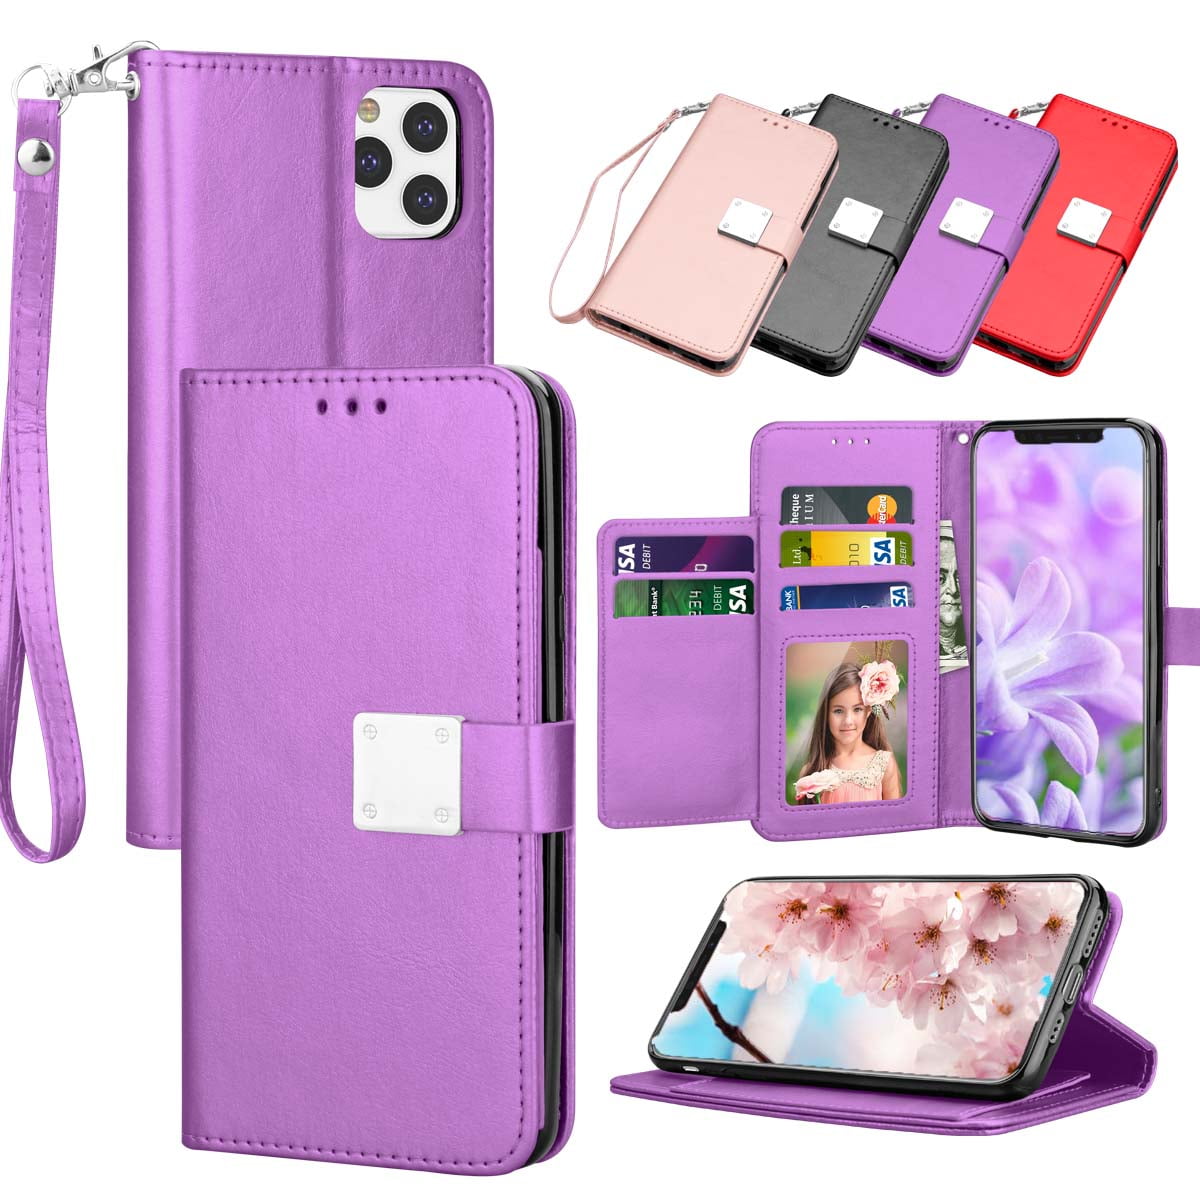 iPhone 11 Case iPhone 11 Cases iPhone11 Girls/Men/Womens Wallet Type Flip Premium Credit Card Holder Case with Wrist Strap Back Cover 